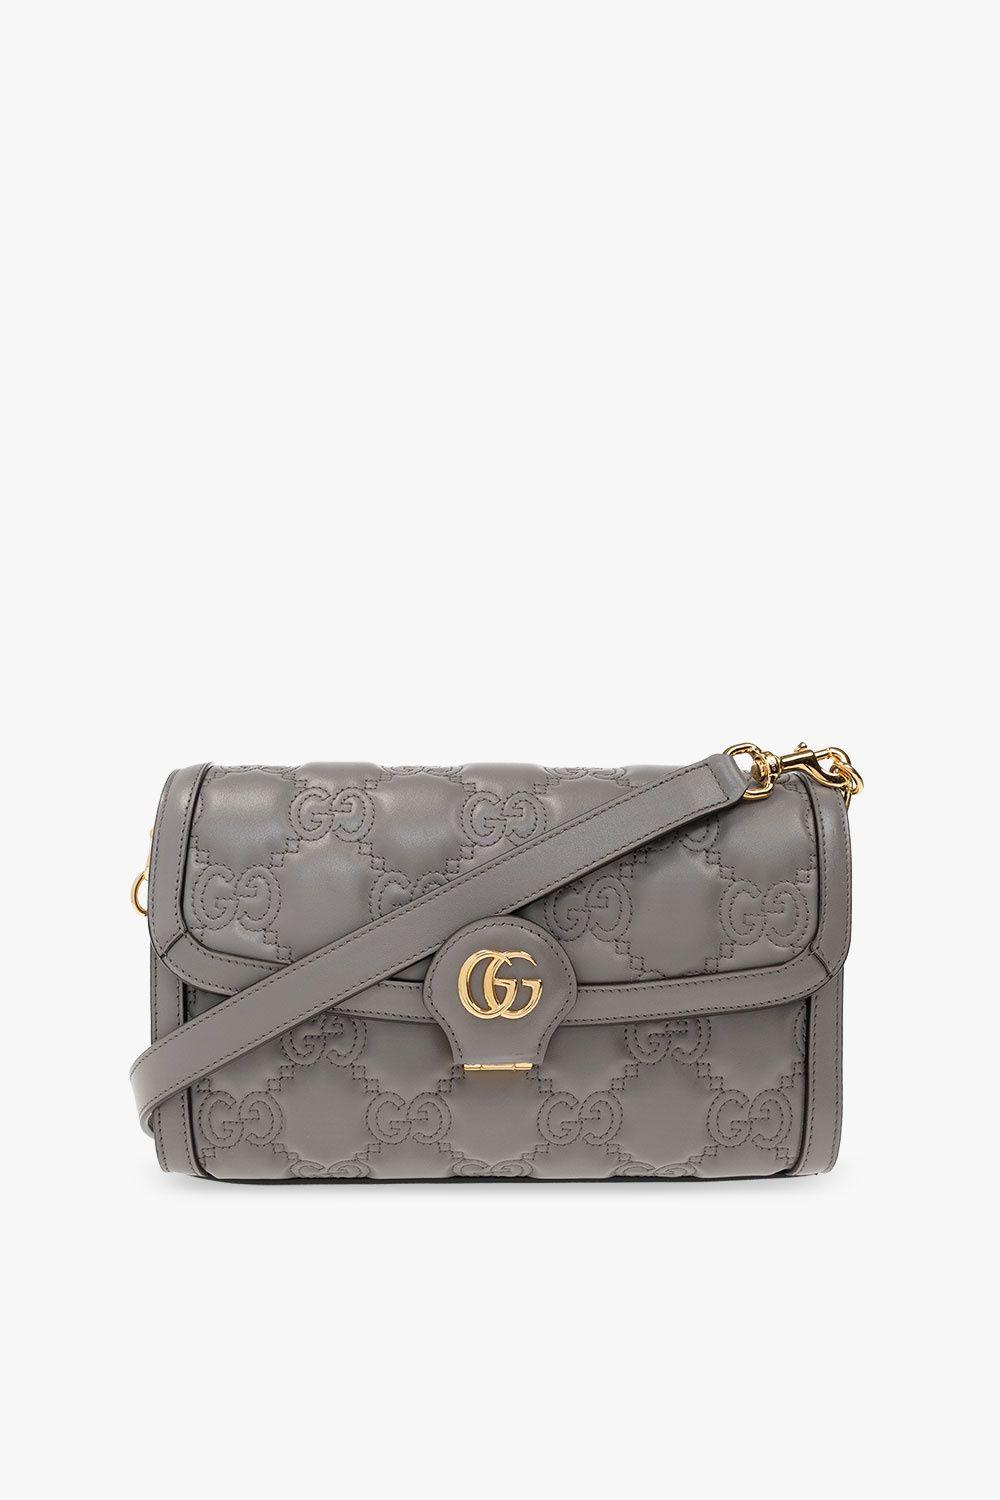 Gucci Quilted Shoulder Bag in Gray | Lyst